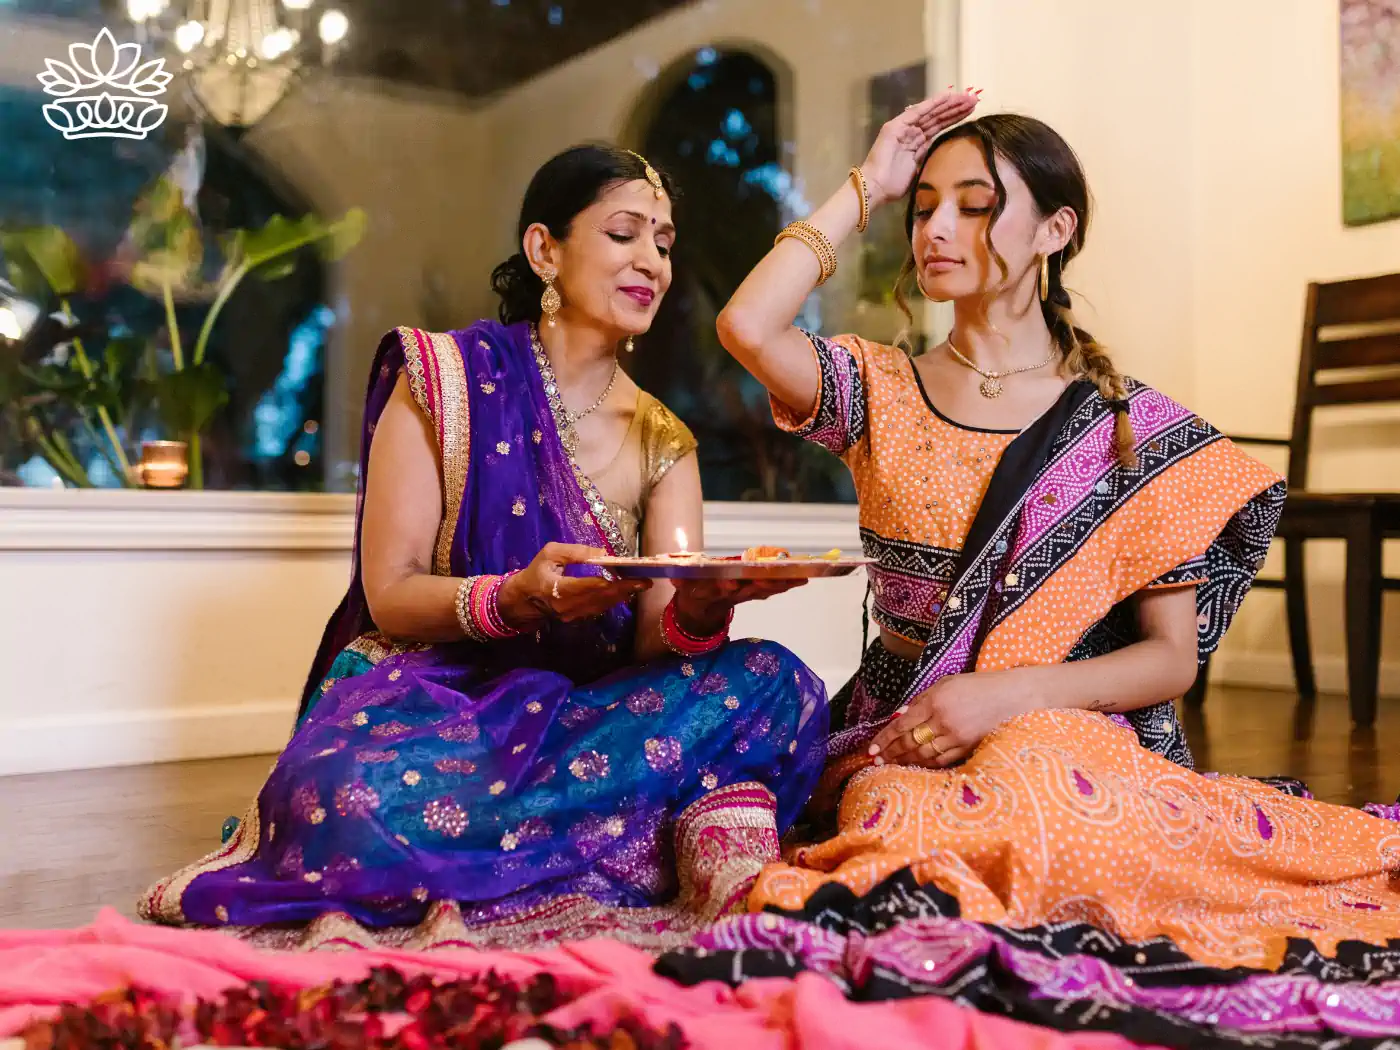 Mother and daughter in vibrant sarees performing traditional rituals during Diwali, sharing a moment of cultural heritage and familial bonding. Diwali. Delivered with Heart by Fabulous Flowers and Gifts.